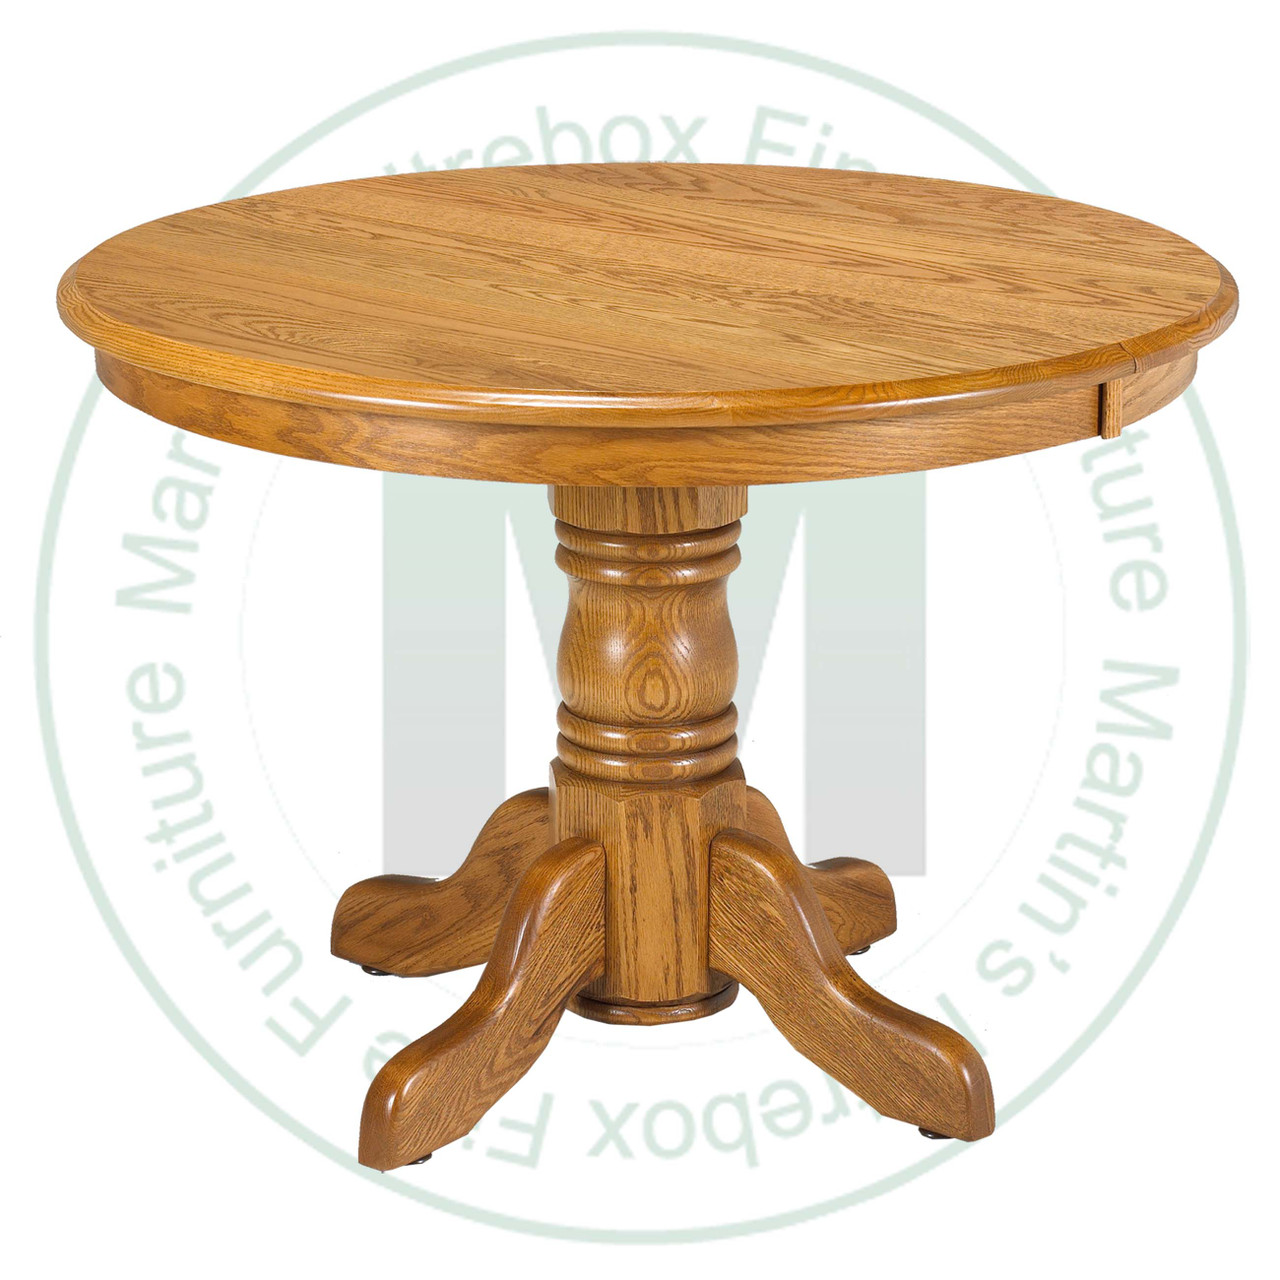 Wormy Maple Lancaster Collection Single Pedestal Table 36''D x 48''W x 30''H  Round Solid Table. Table Has 1'' Thick Top